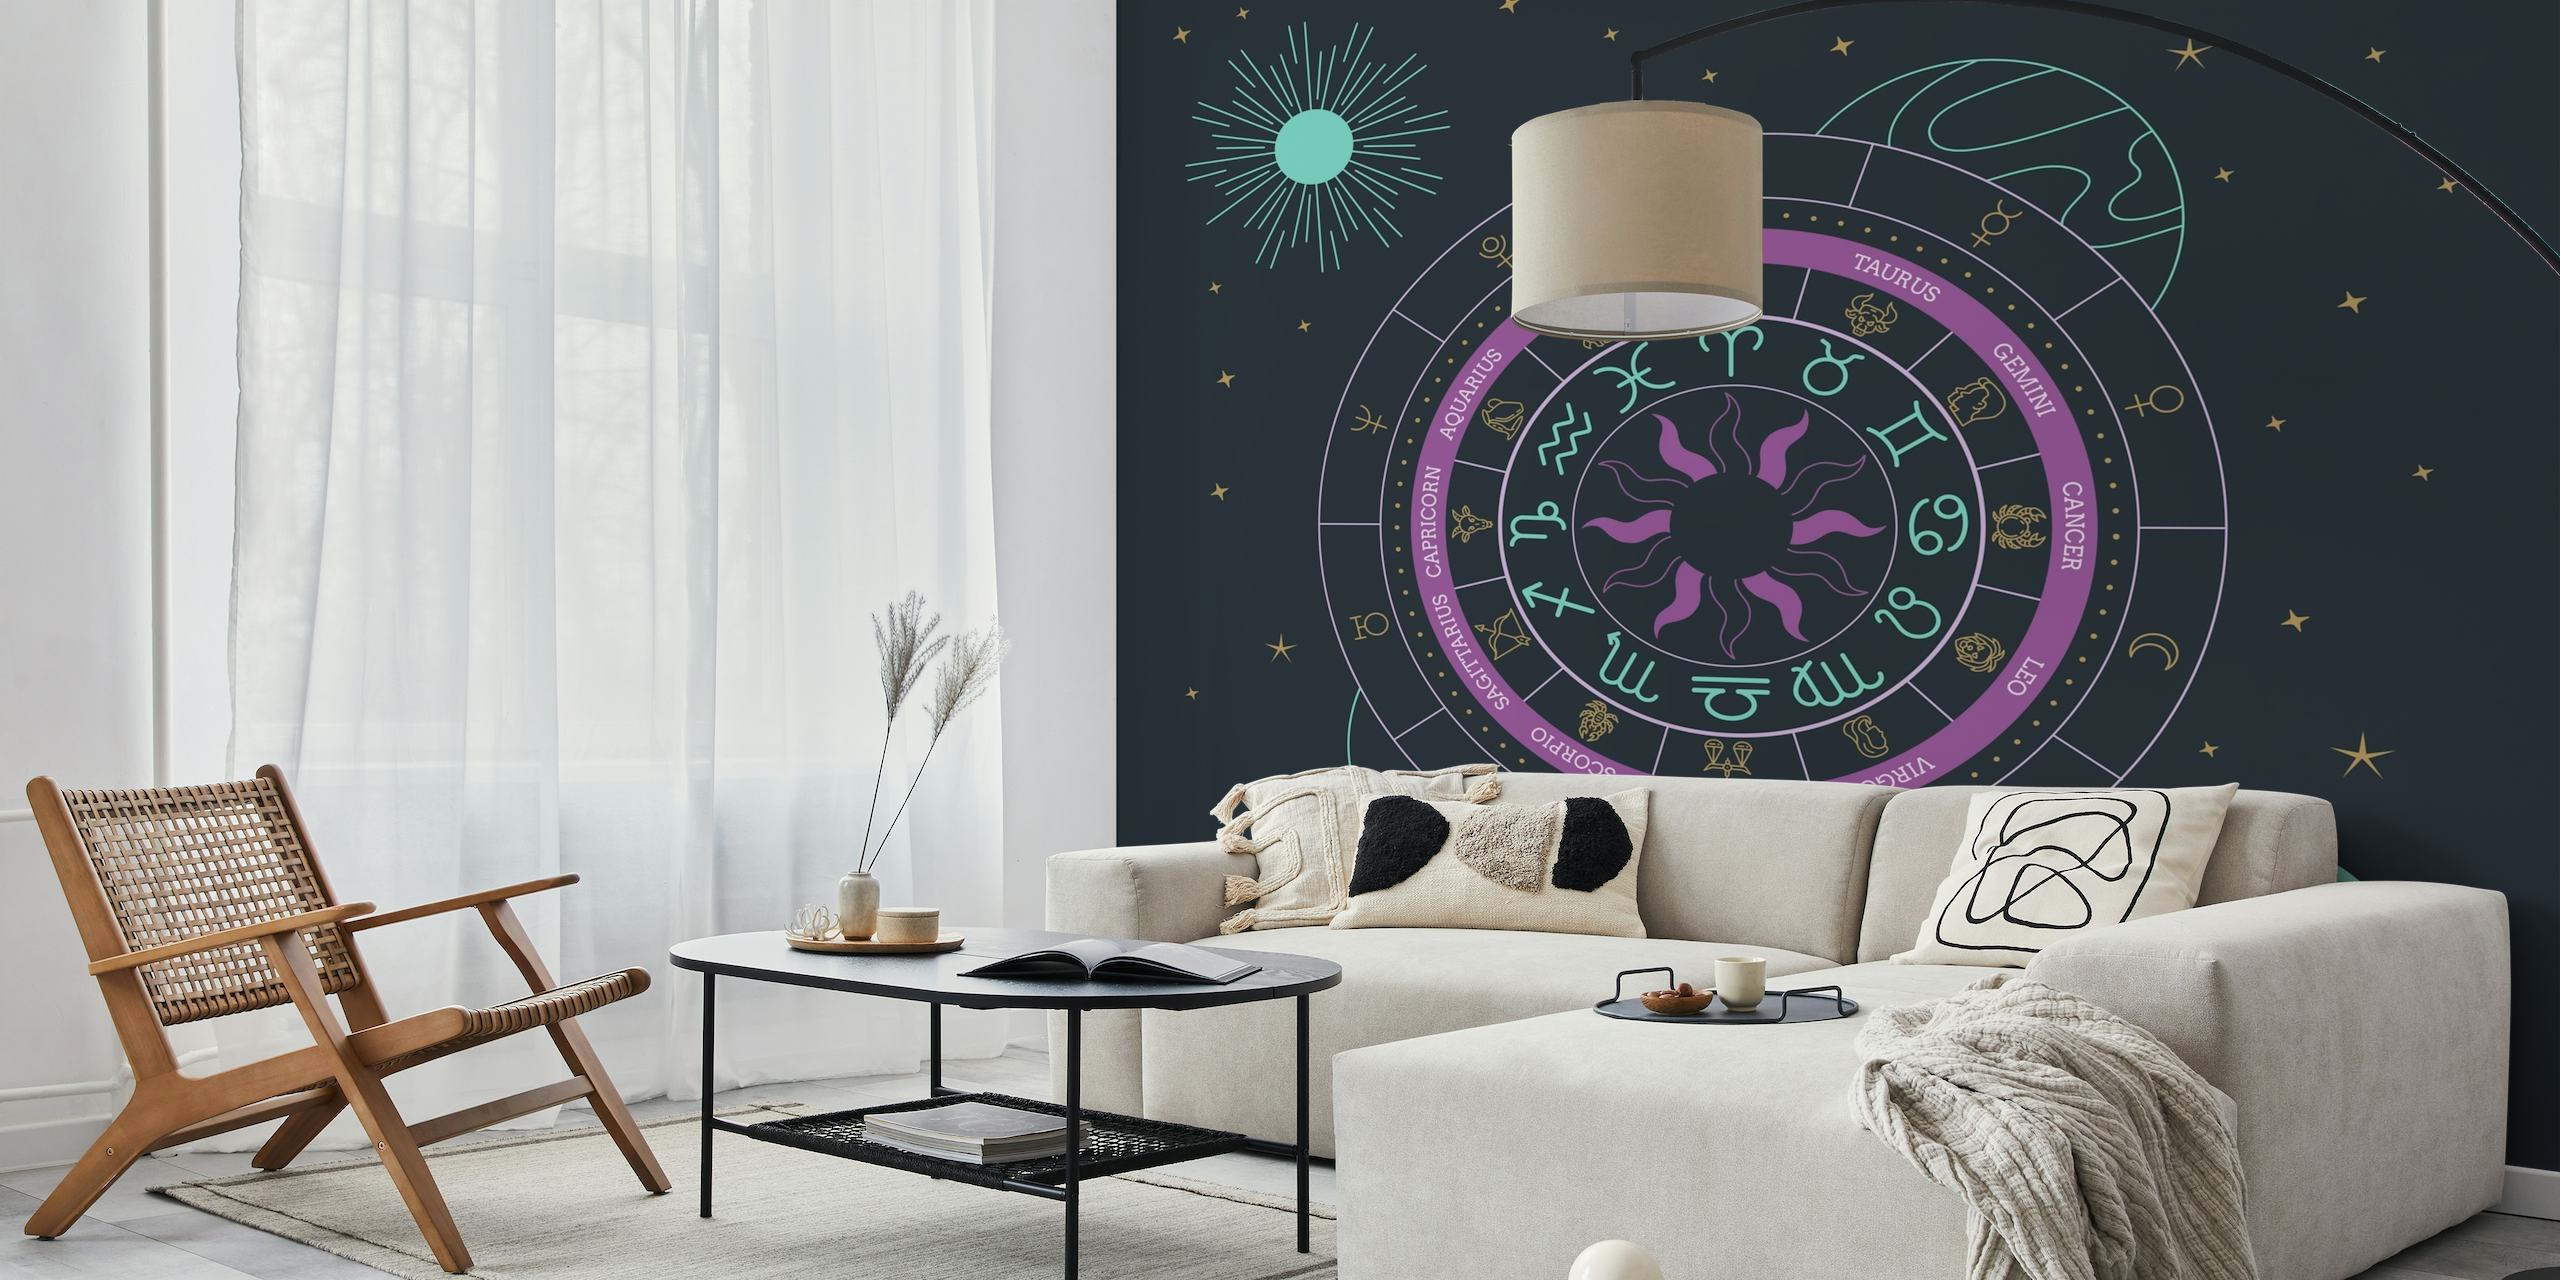 Zodiac Astrology Wheel Wall Mural displaying ancient astrology signs and modern geometric designs